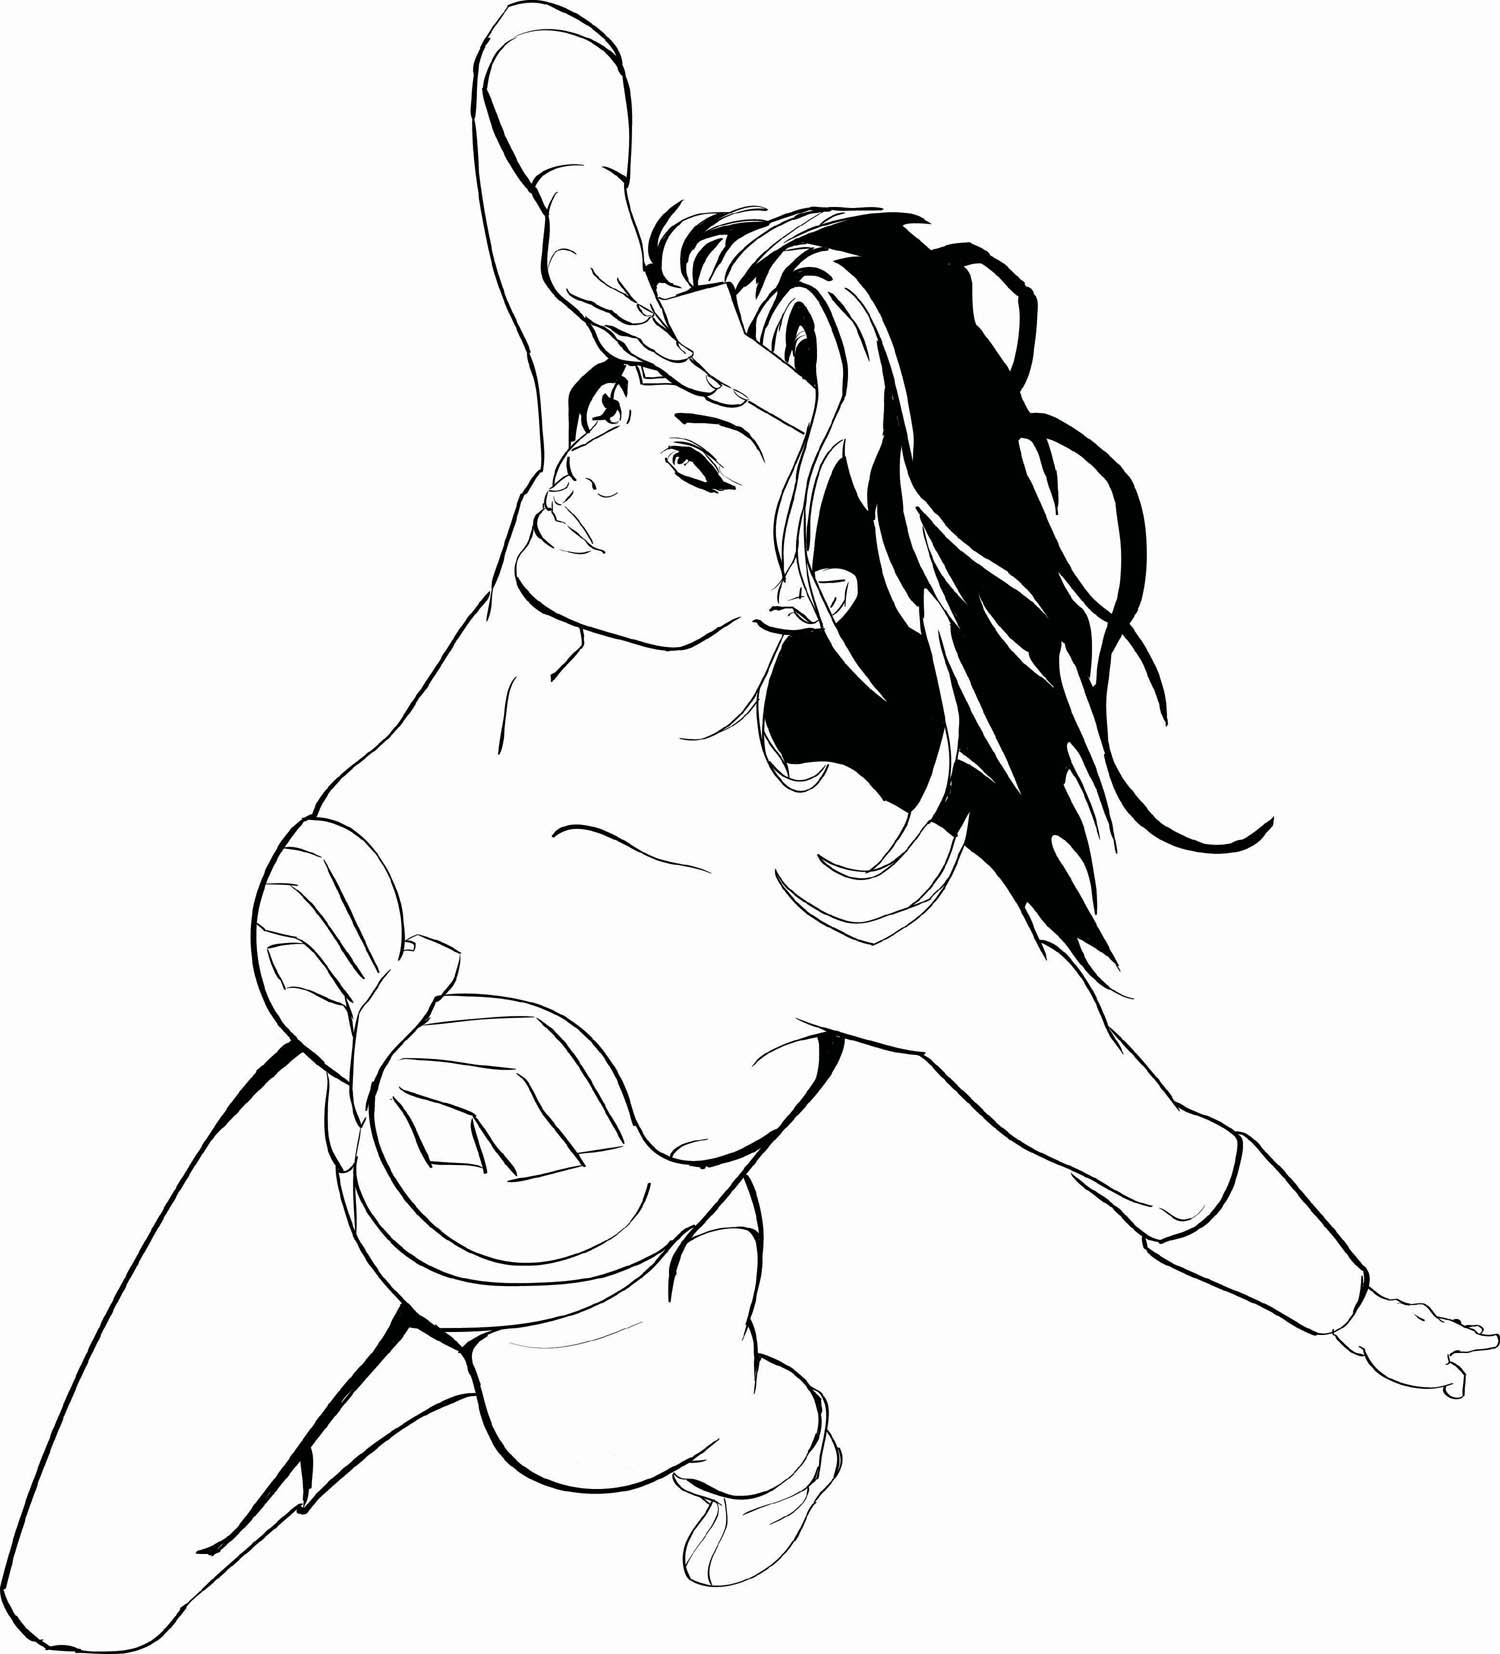 Coloring page: DC Comics Super Heroes (Superheroes) #80233 - Free Printable Coloring Pages